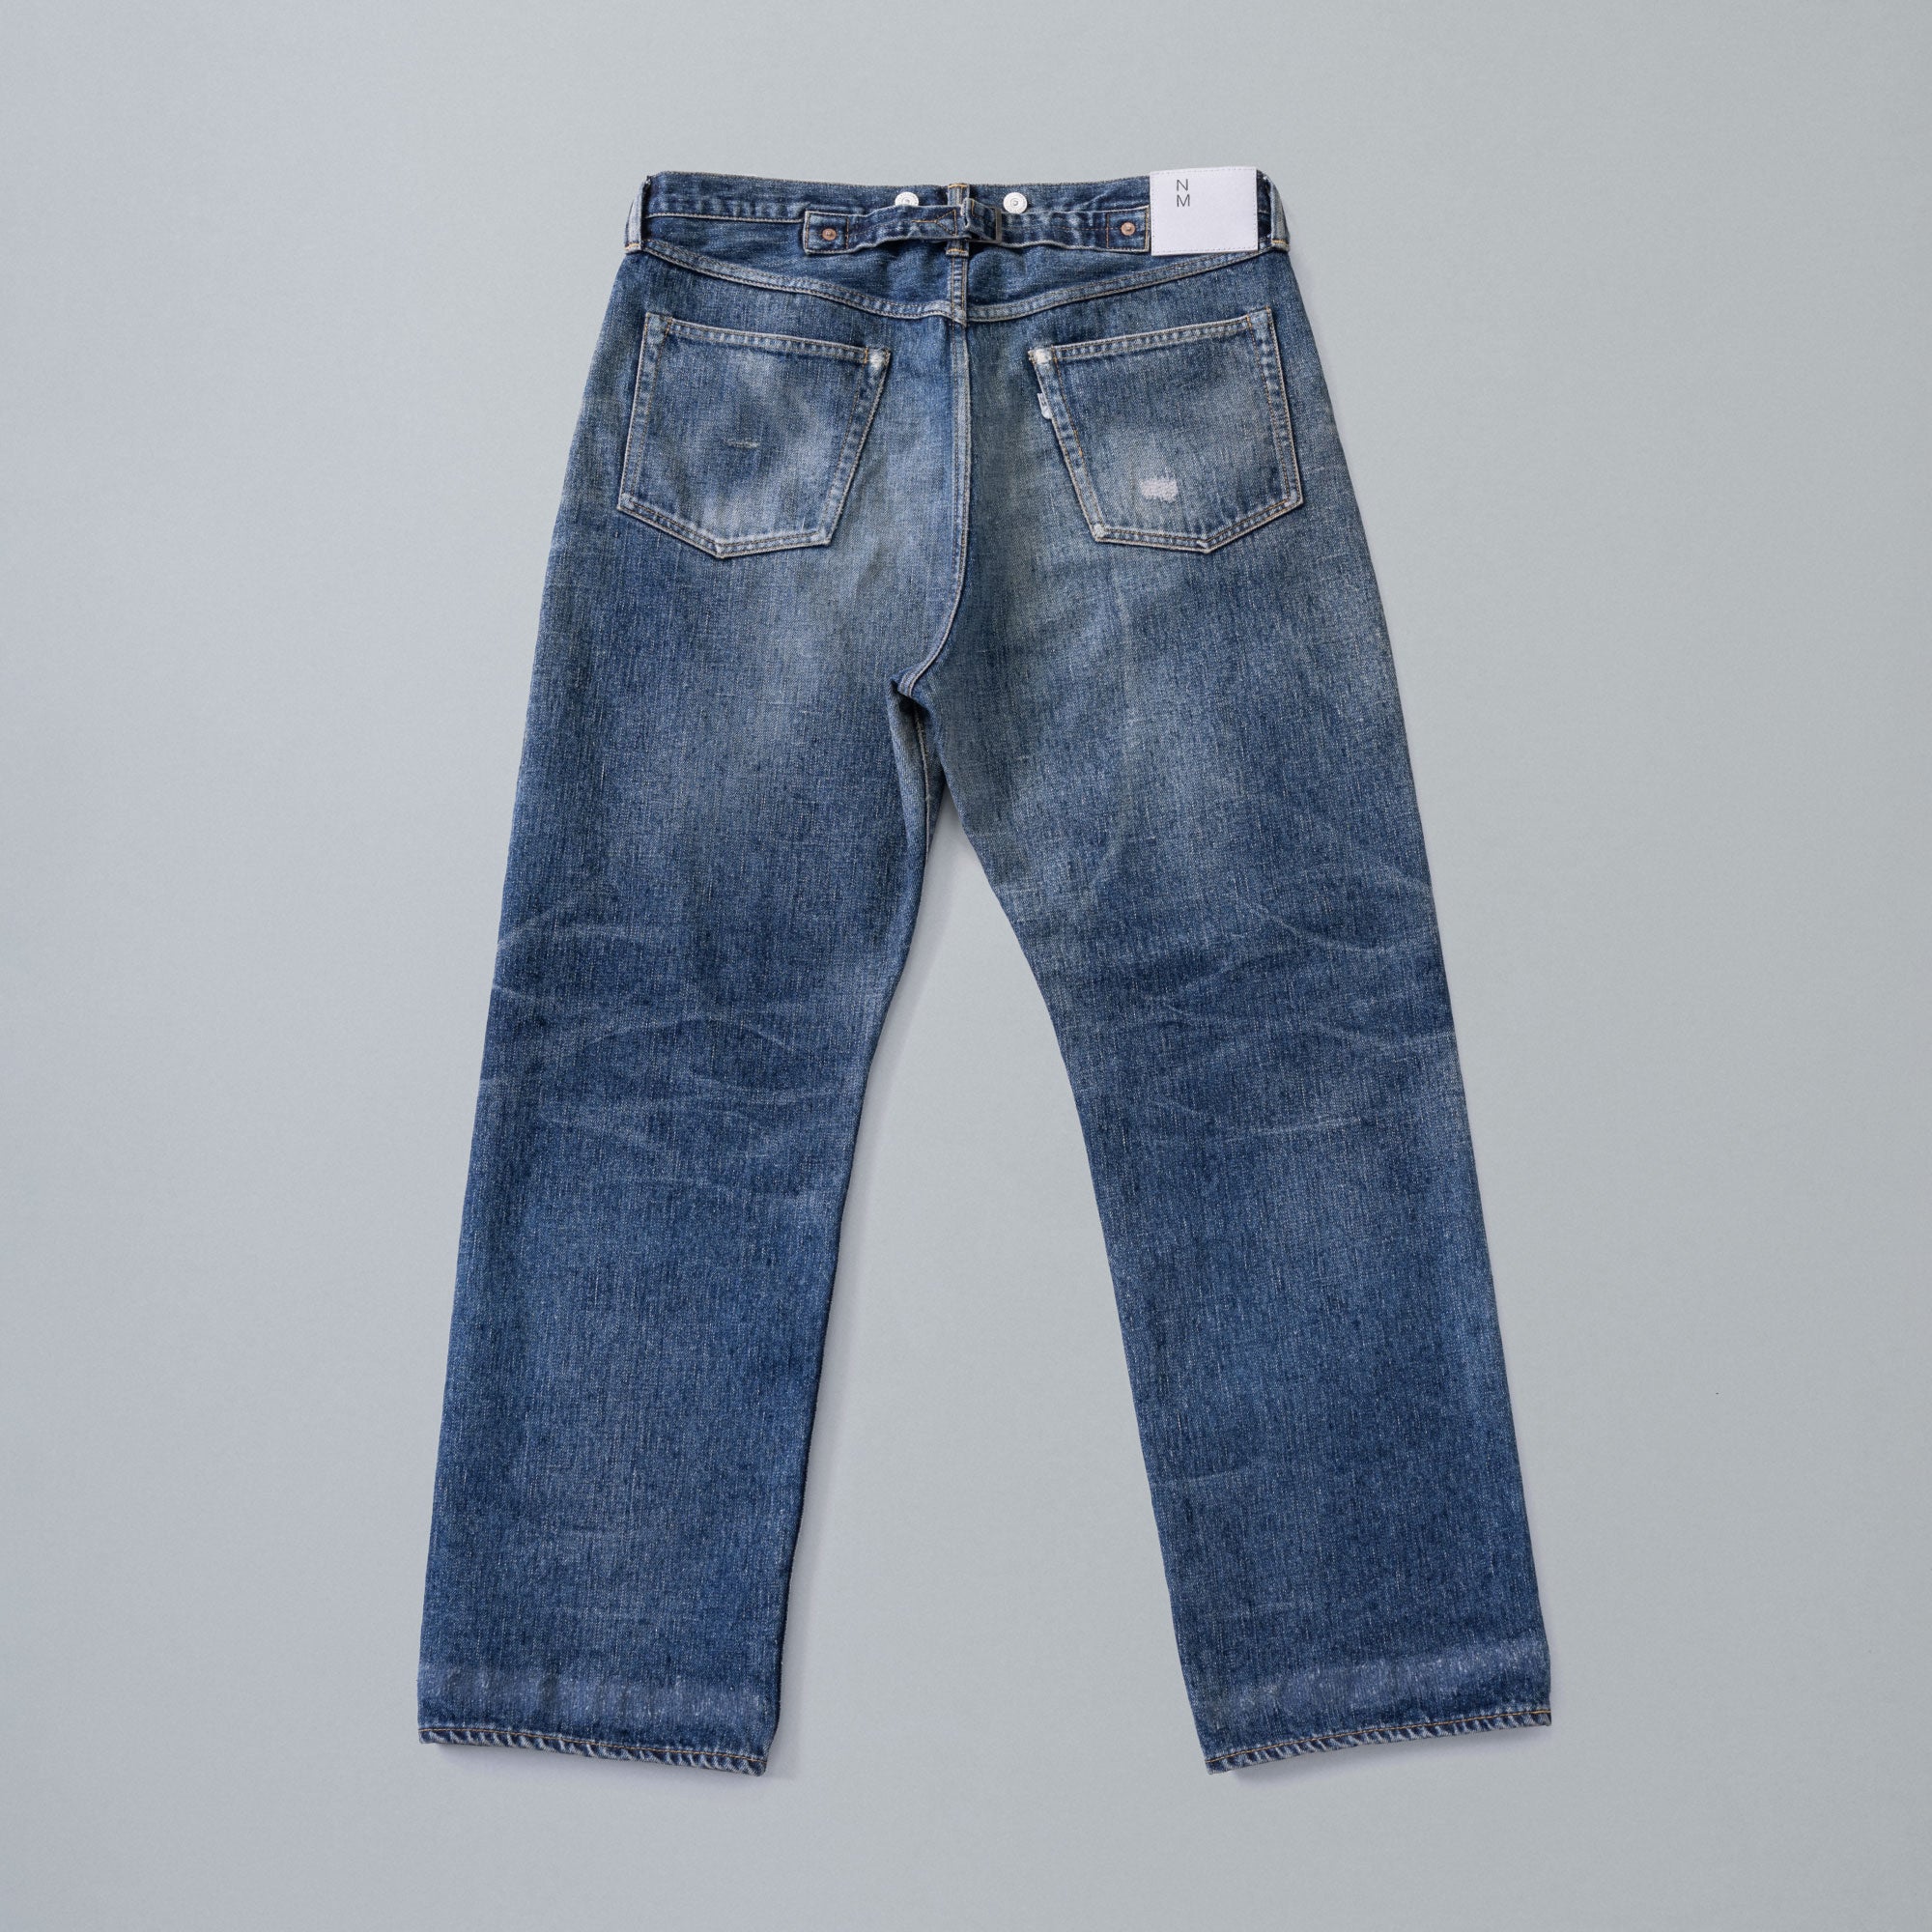 002 1942 LV JEANS – New Manual